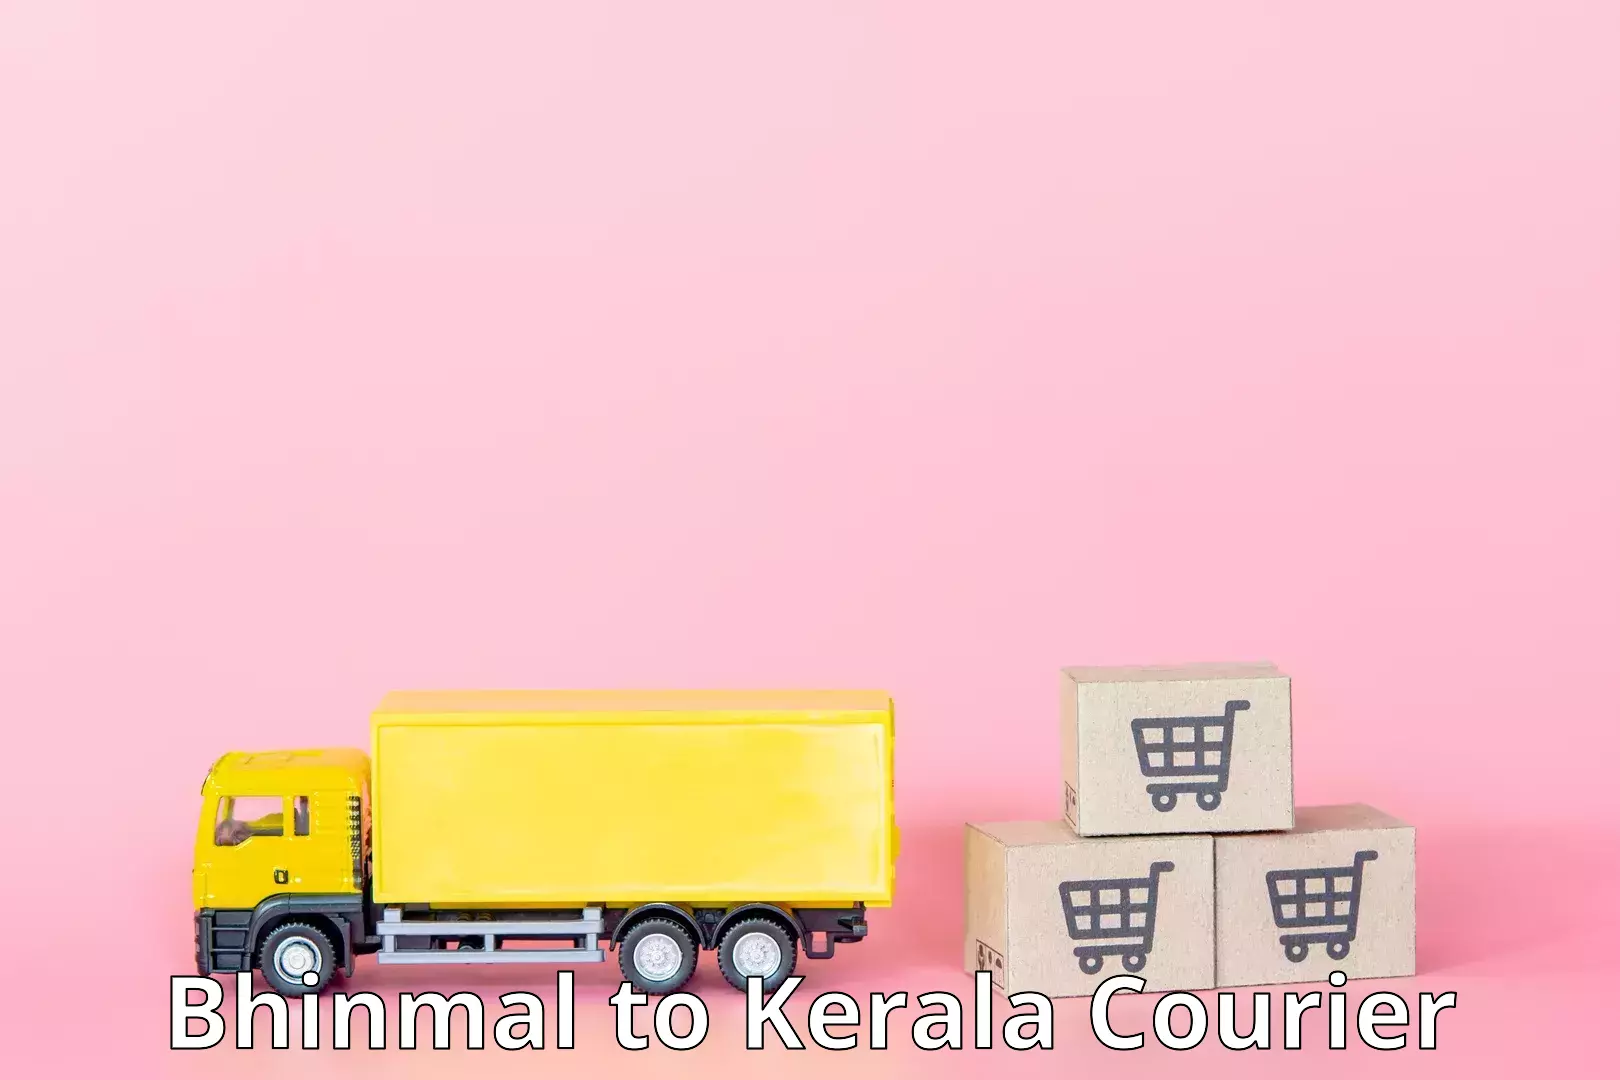 Package delivery network Bhinmal to Kerala